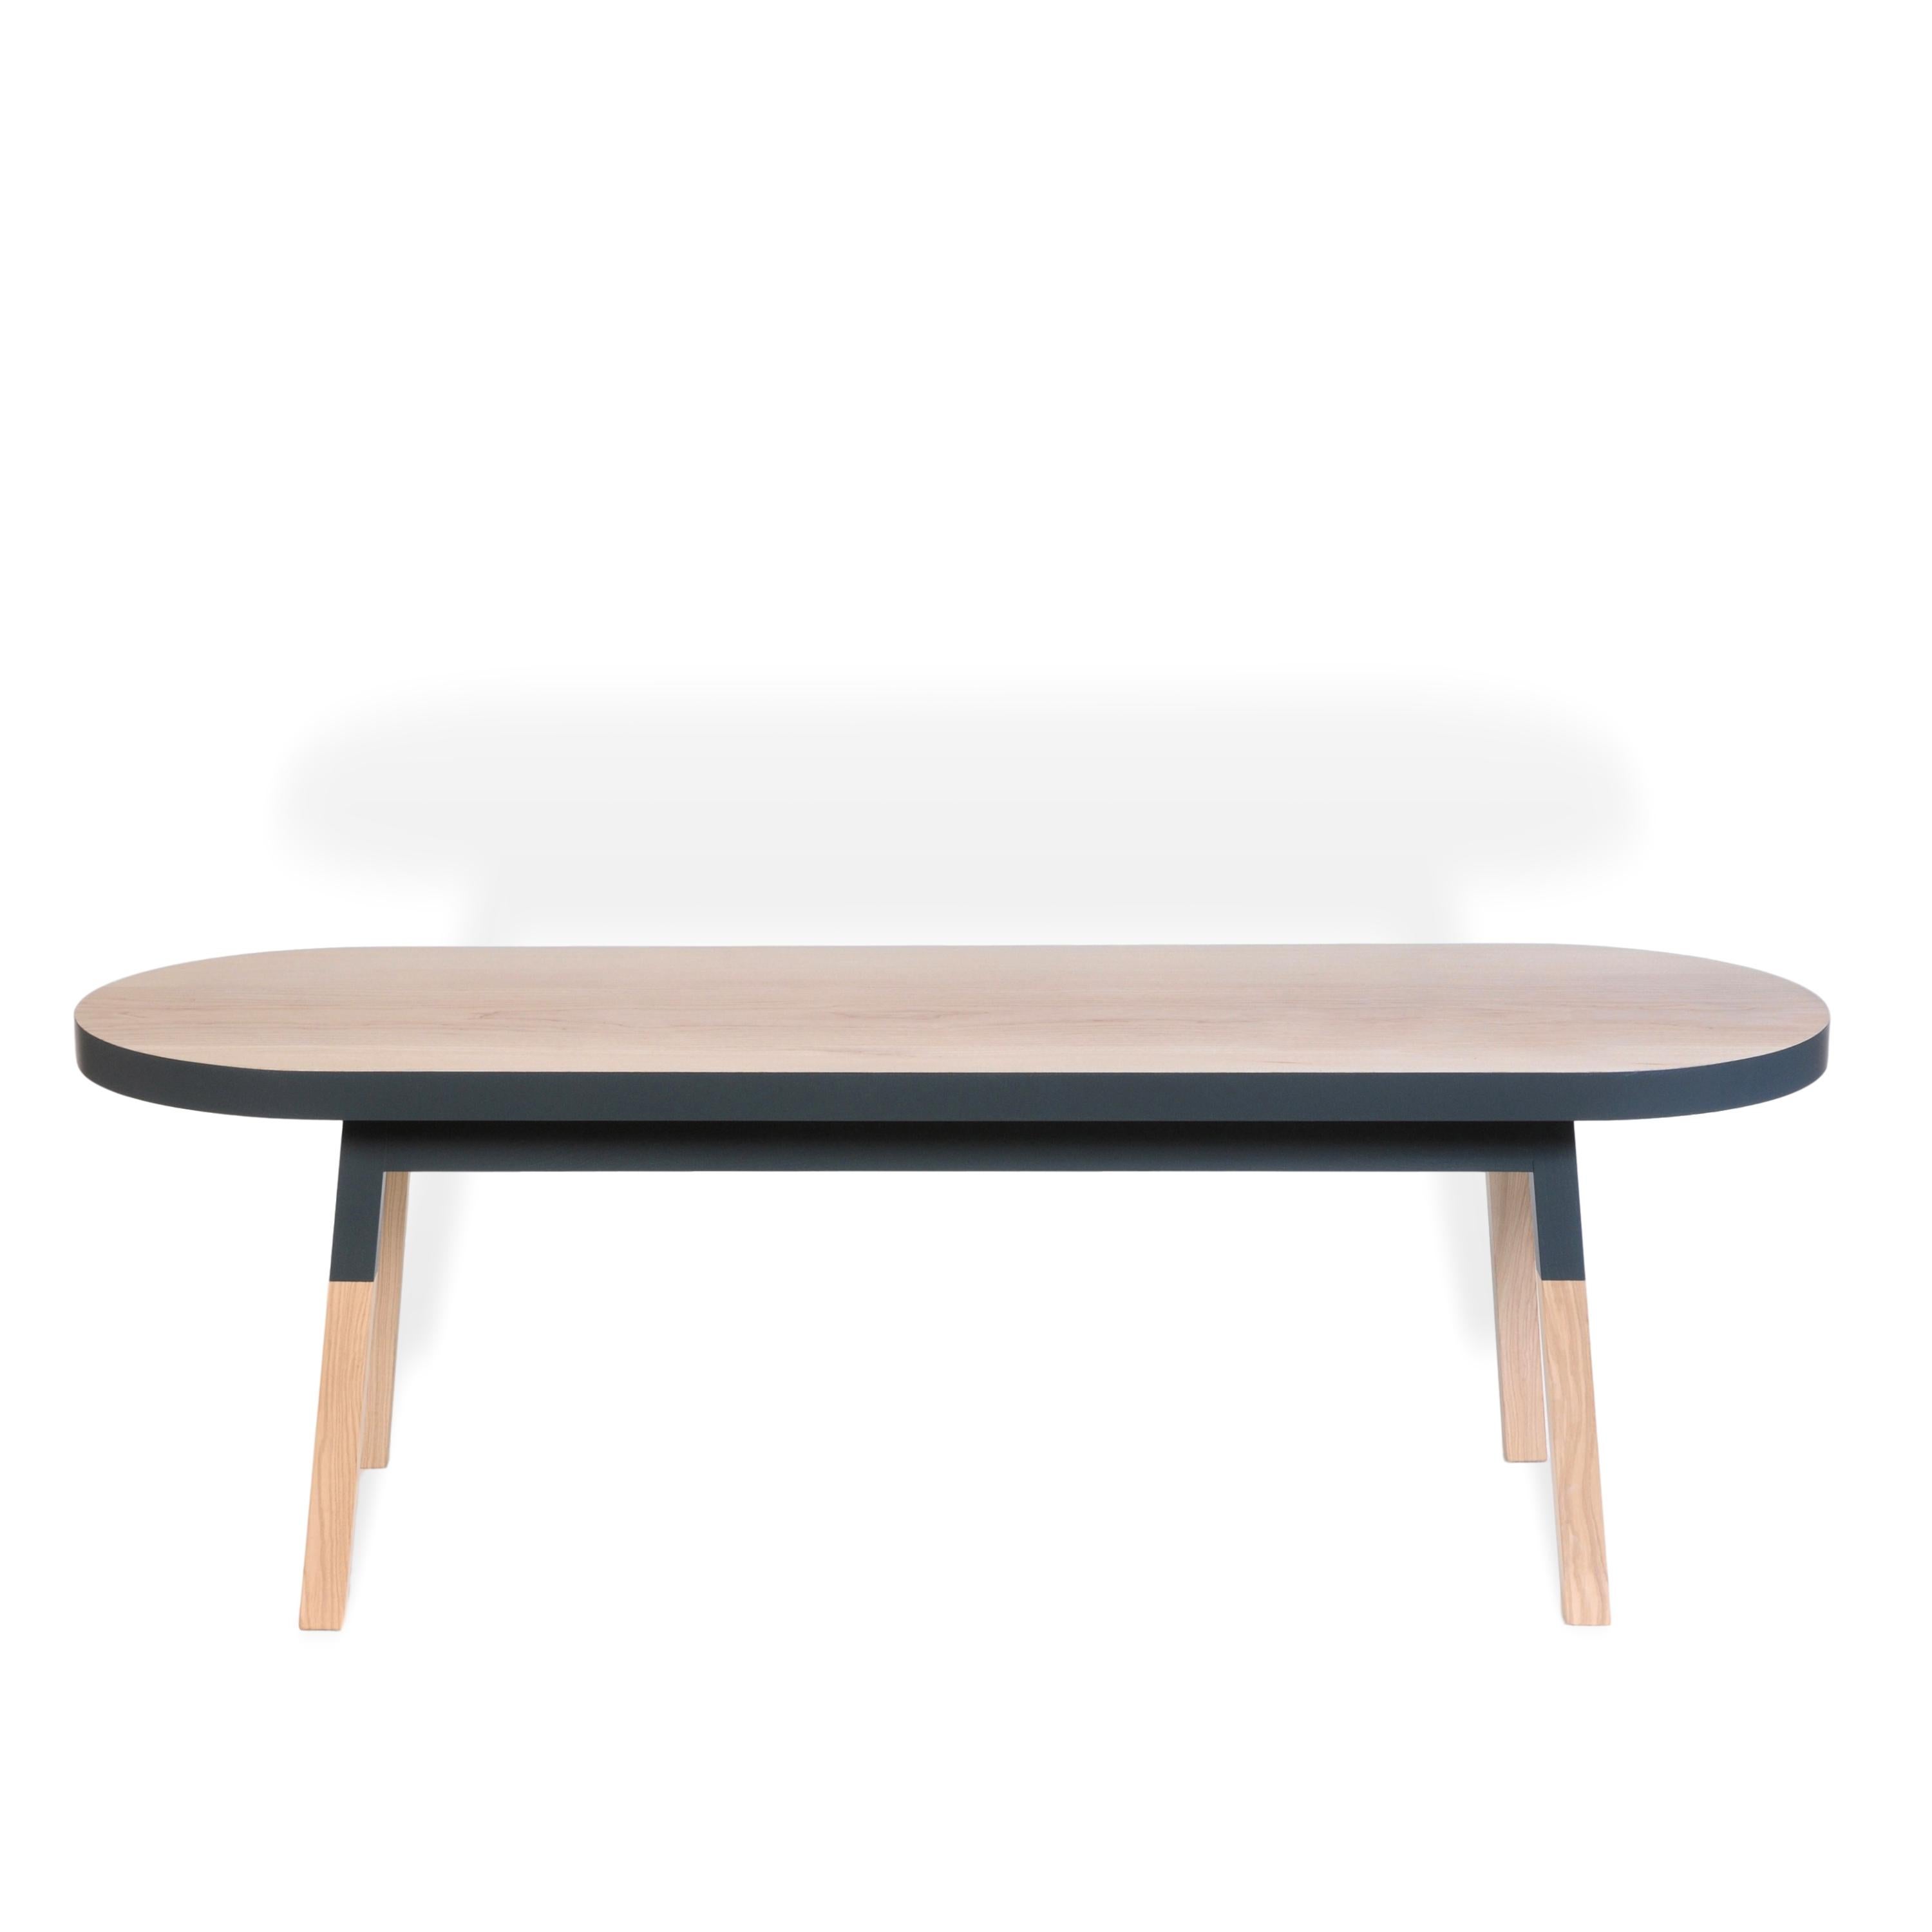 This coffee table (also bench) is designed by Eric Gizard - Paris.

It is 100% made in France with exclusive solid ash wood from sustainable managed French forests.

It can also be used as a TV stand, Bed end or Sofa Back Table.

Weight 18